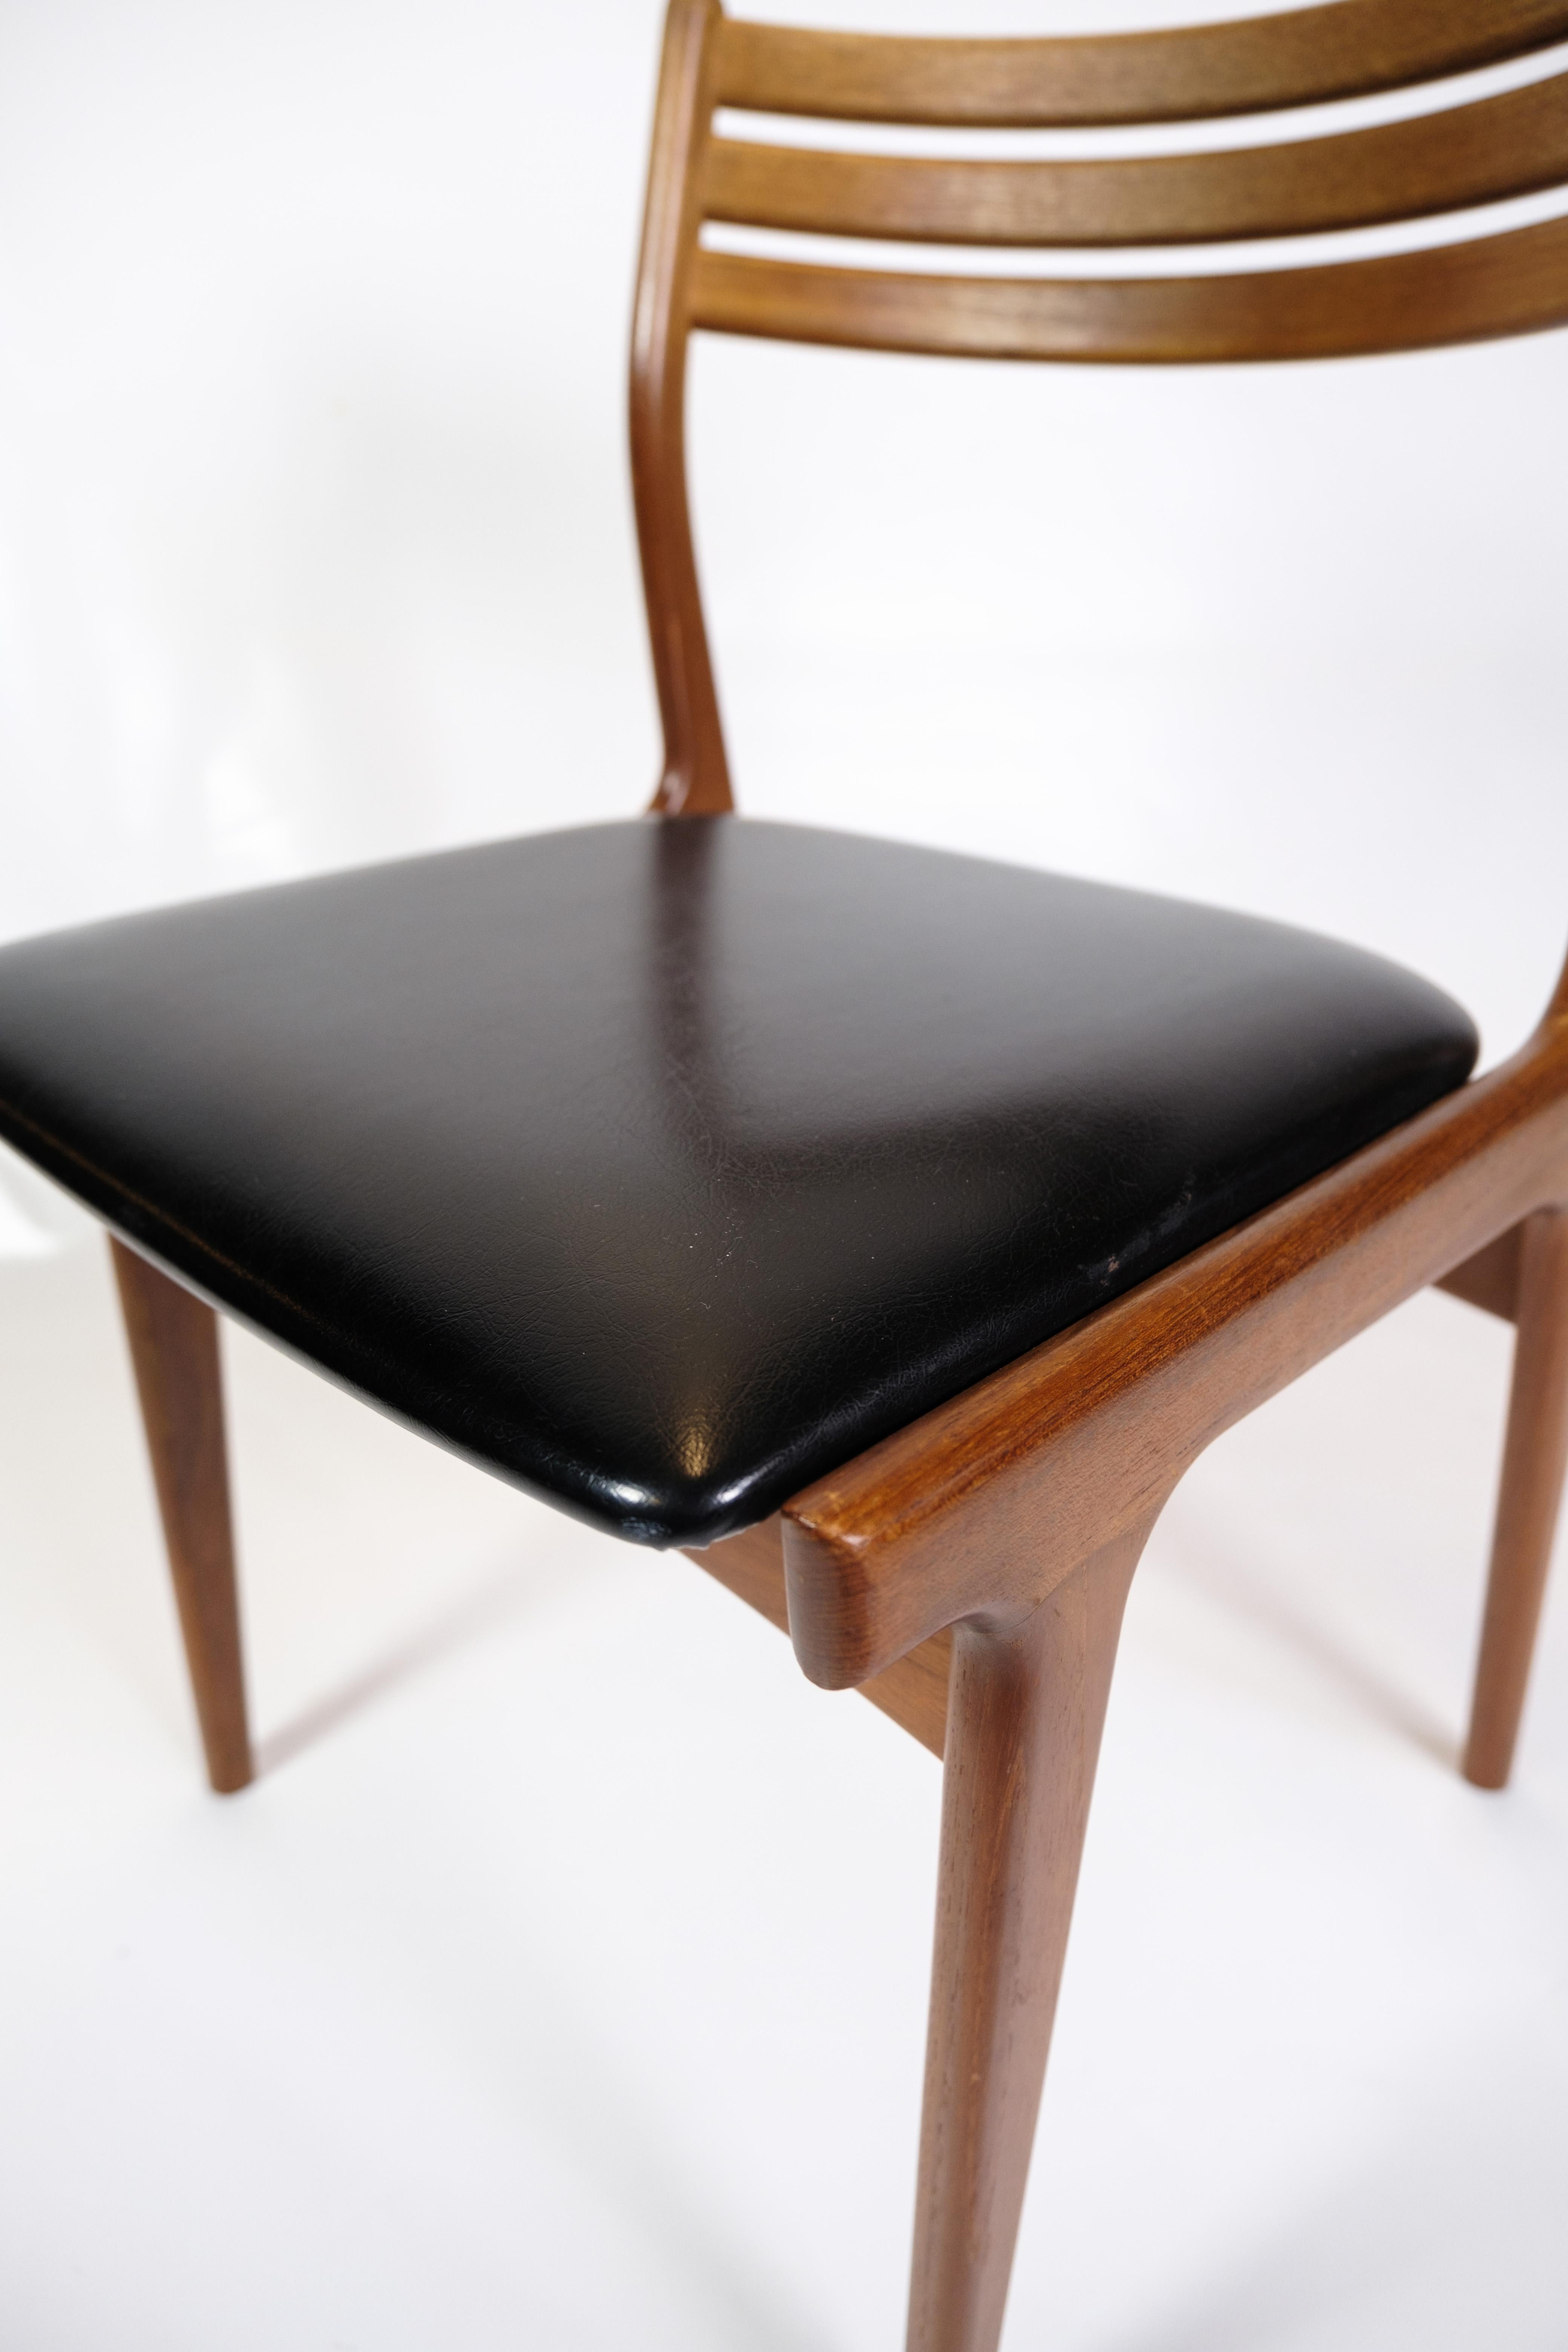 Set Of 6 Dining Room Chairs Model U20 Made In Teak By Johannes Andersen 1960s In Good Condition For Sale In Lejre, DK